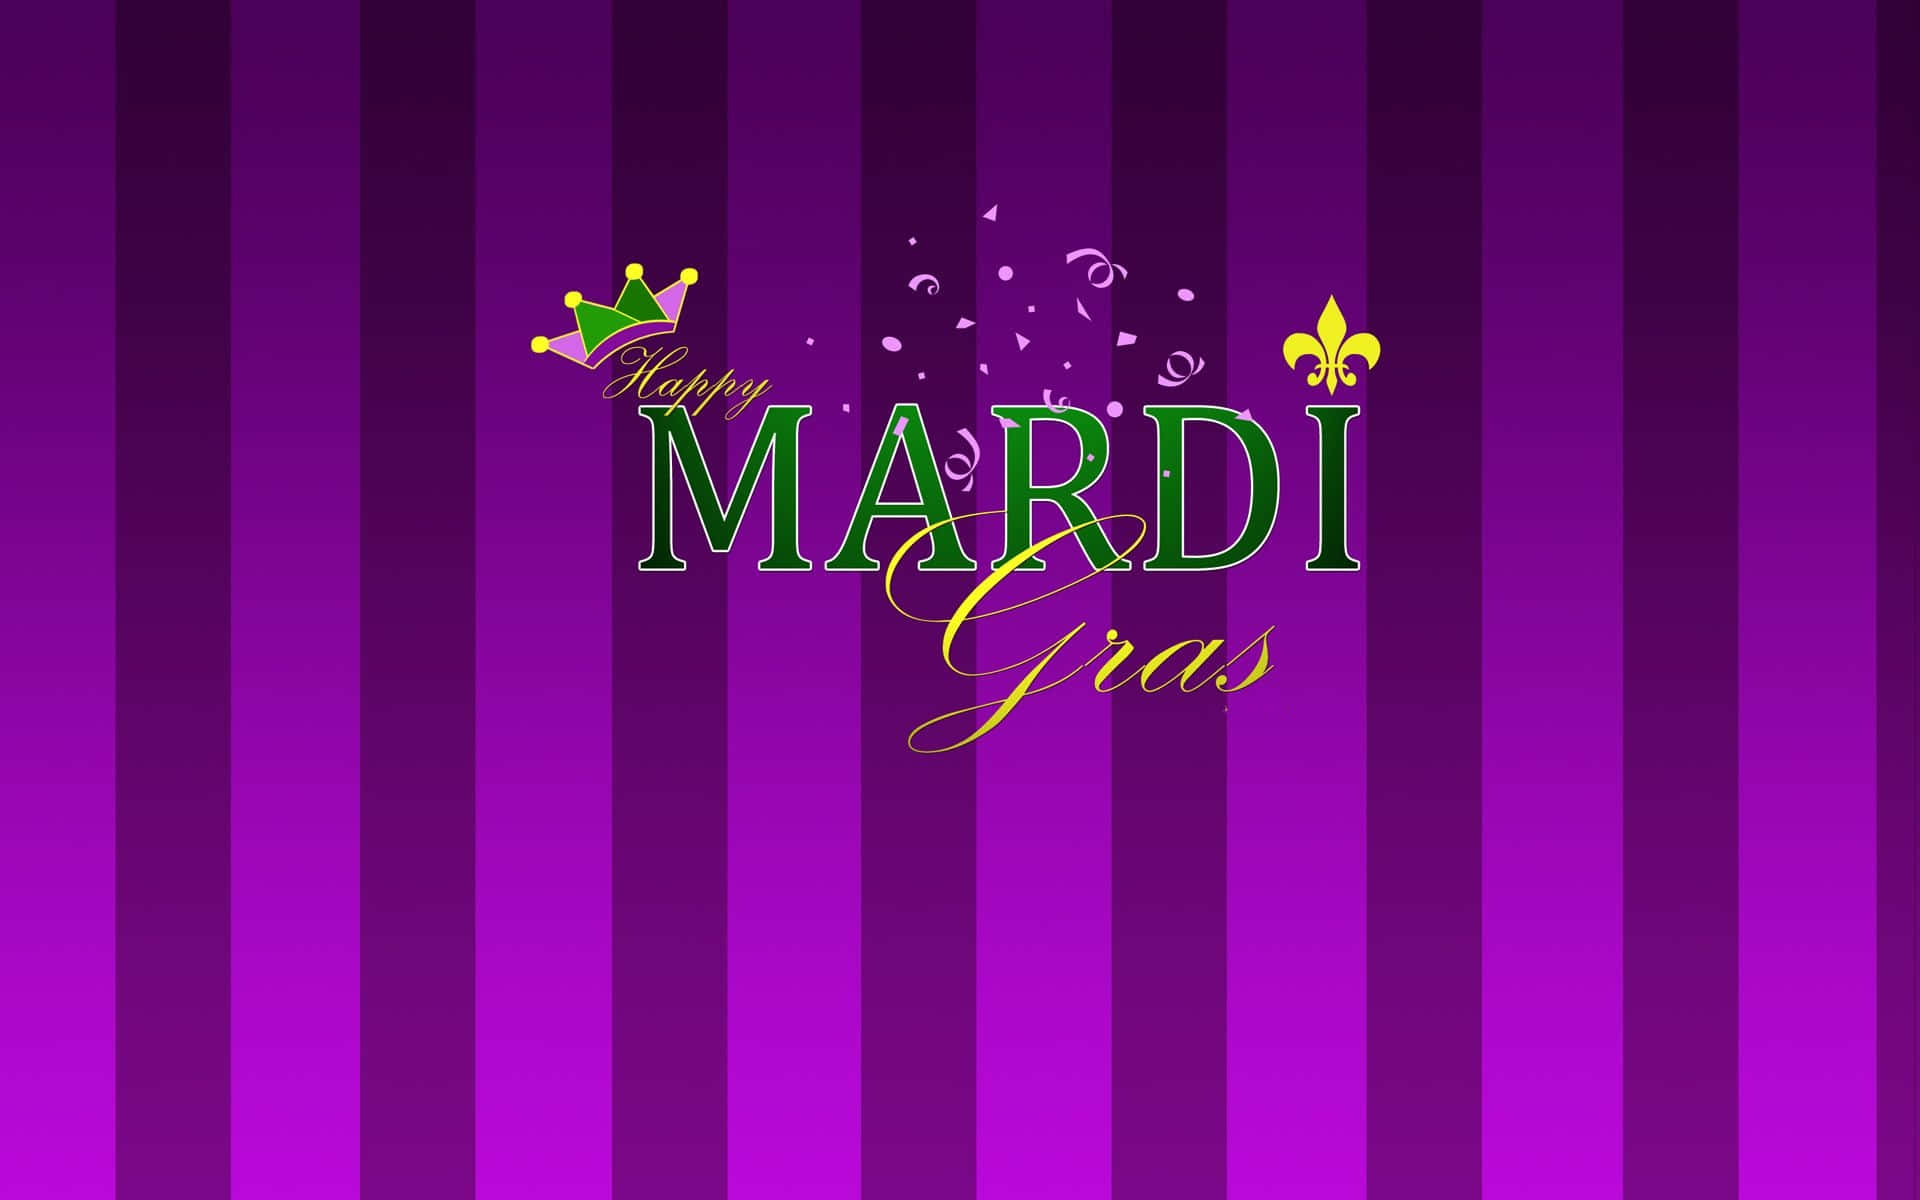 Celebrate Mardi Gras in all its colors and glory!